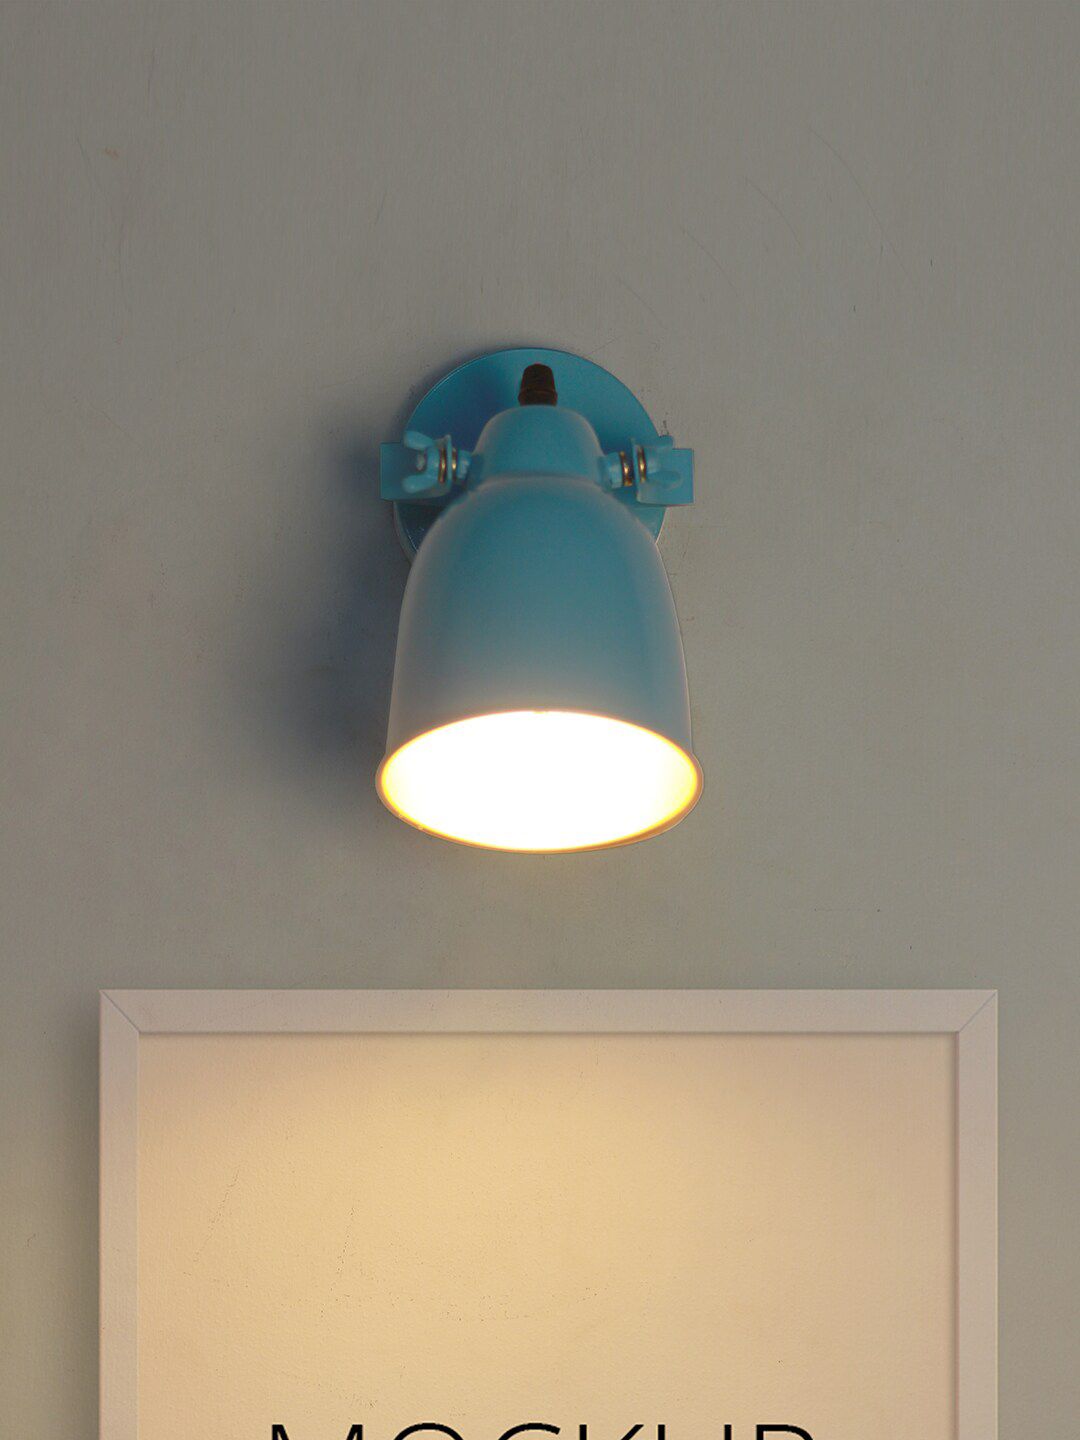 Fos Lighting Blue Wall Spot Lamp Price in India